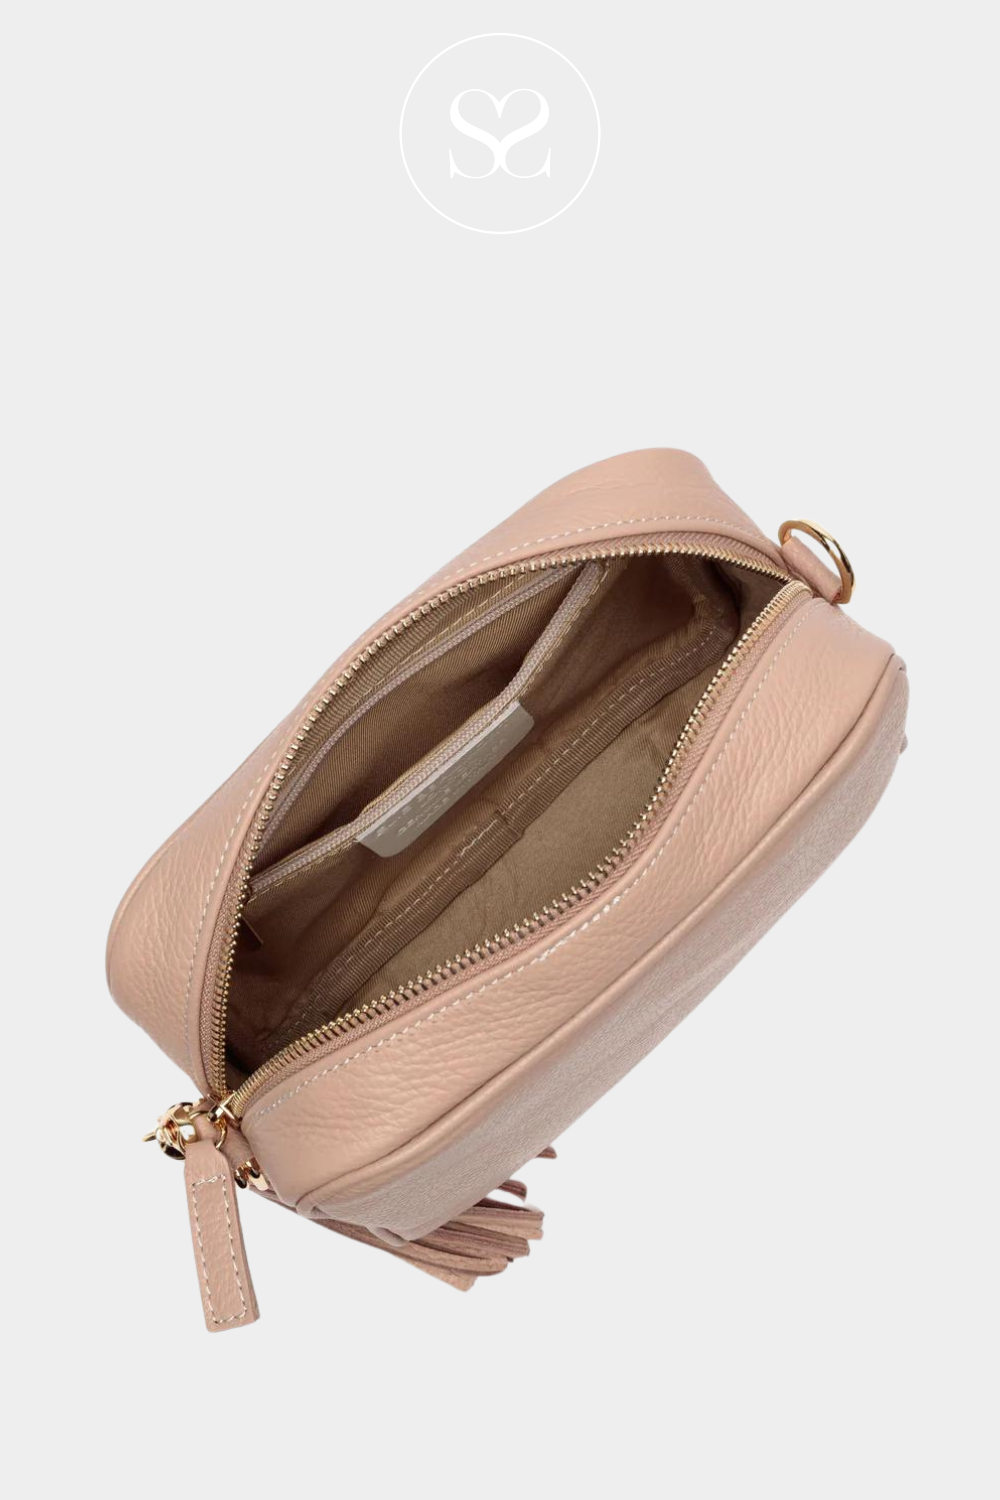 ELIE BEAUMONT BLUSH LEATHER CROSSBODY BAG WITH TASSEL